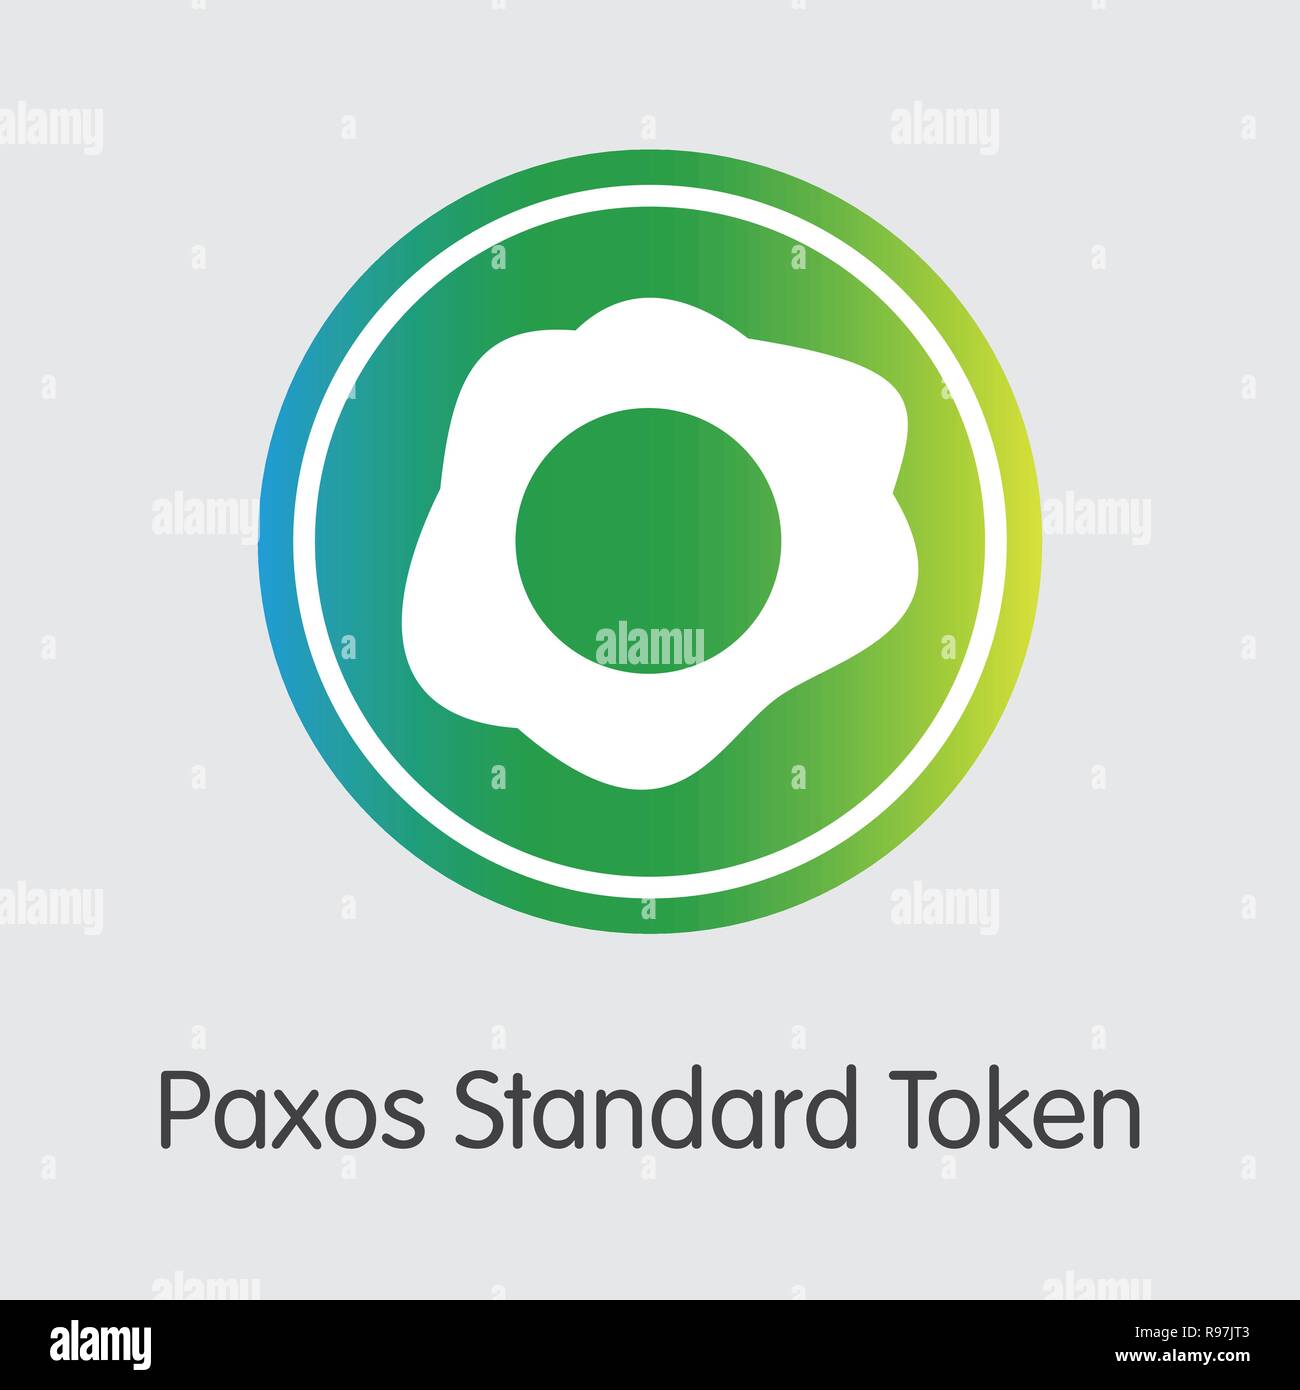 PAX - Paxos Standard Token. The Crypto Coins or Cryptocurrency L Stock Vector